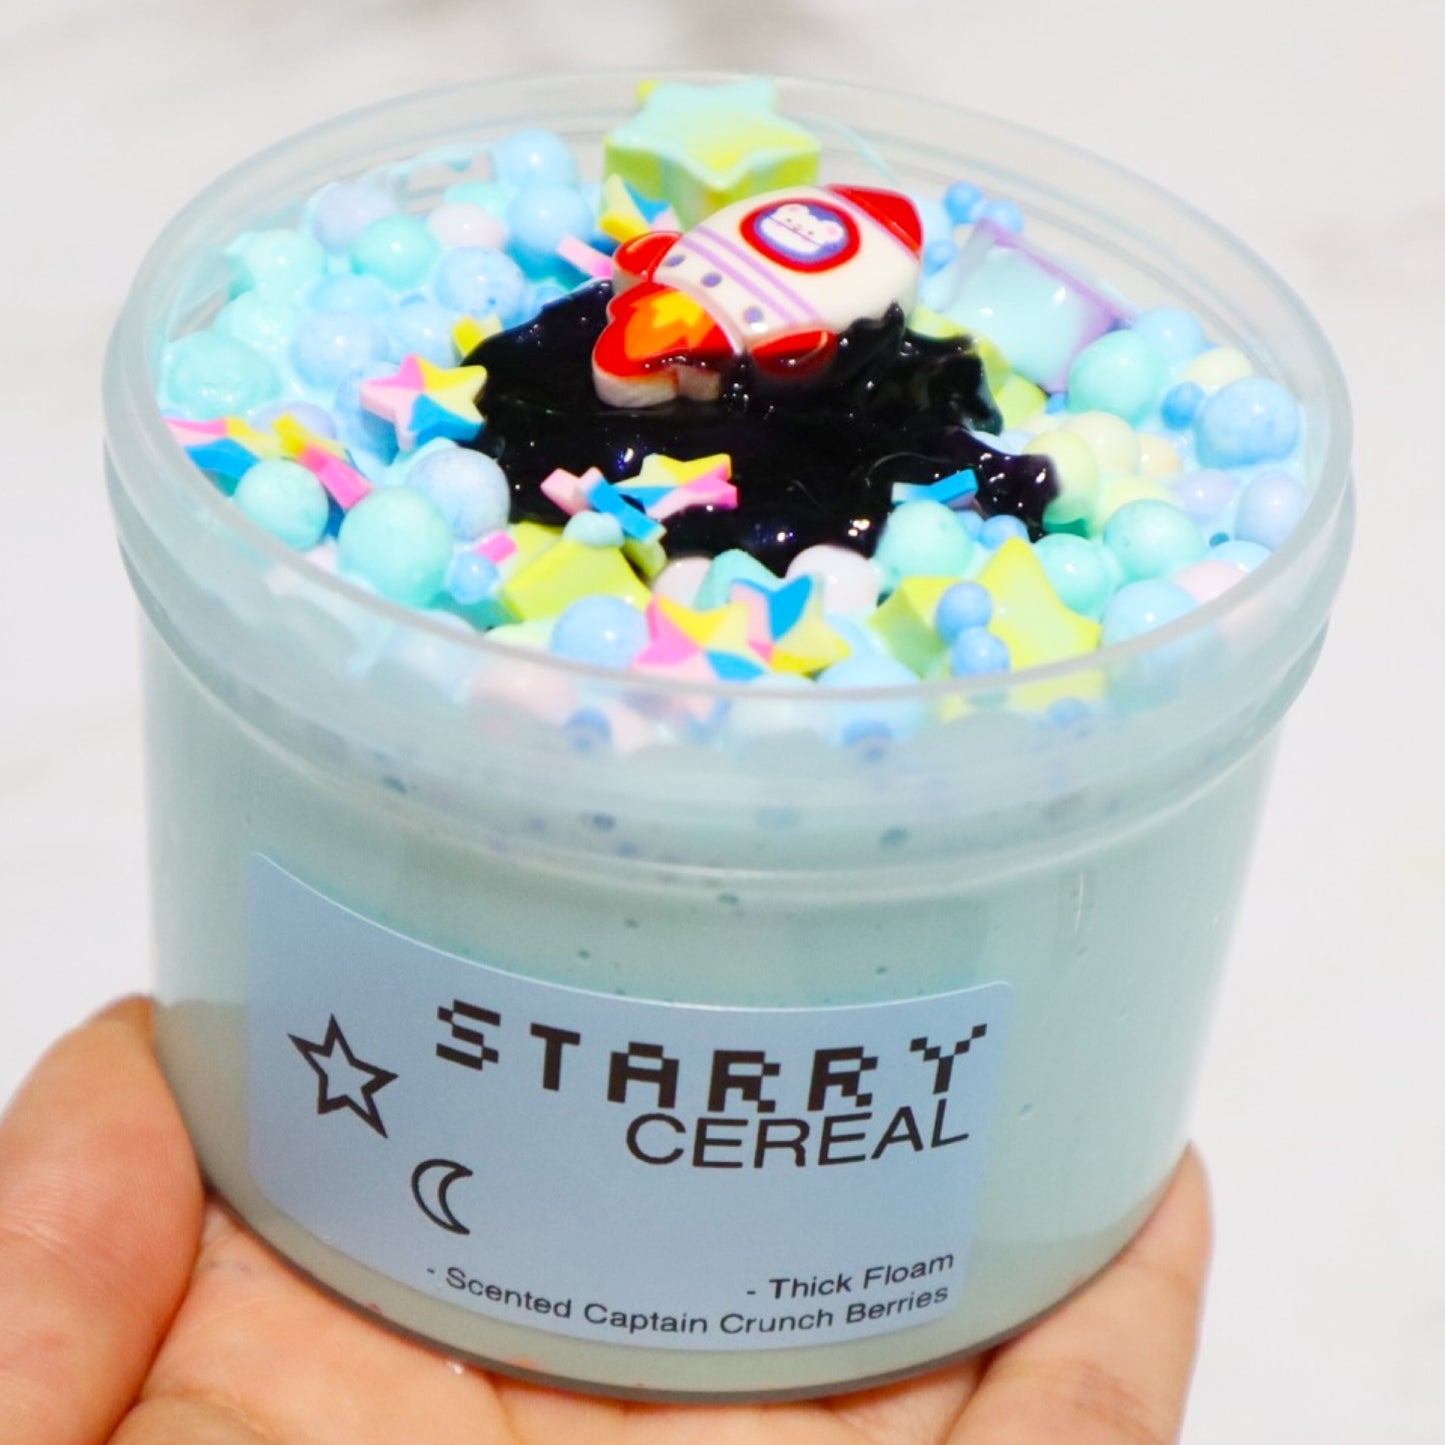 Starry Cereal